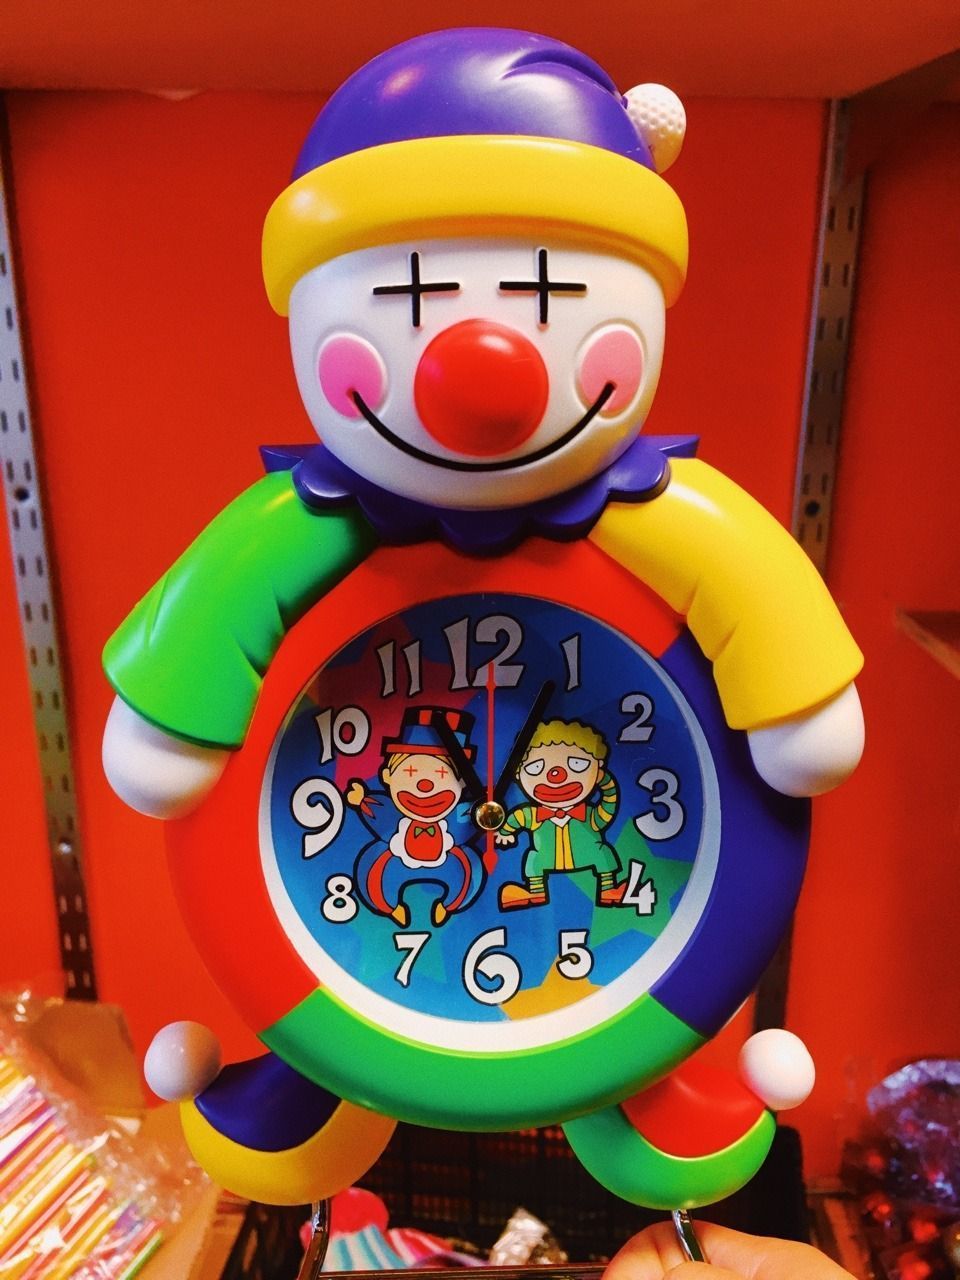 A colorful clown clock with two clowns on the front. - Clowncore